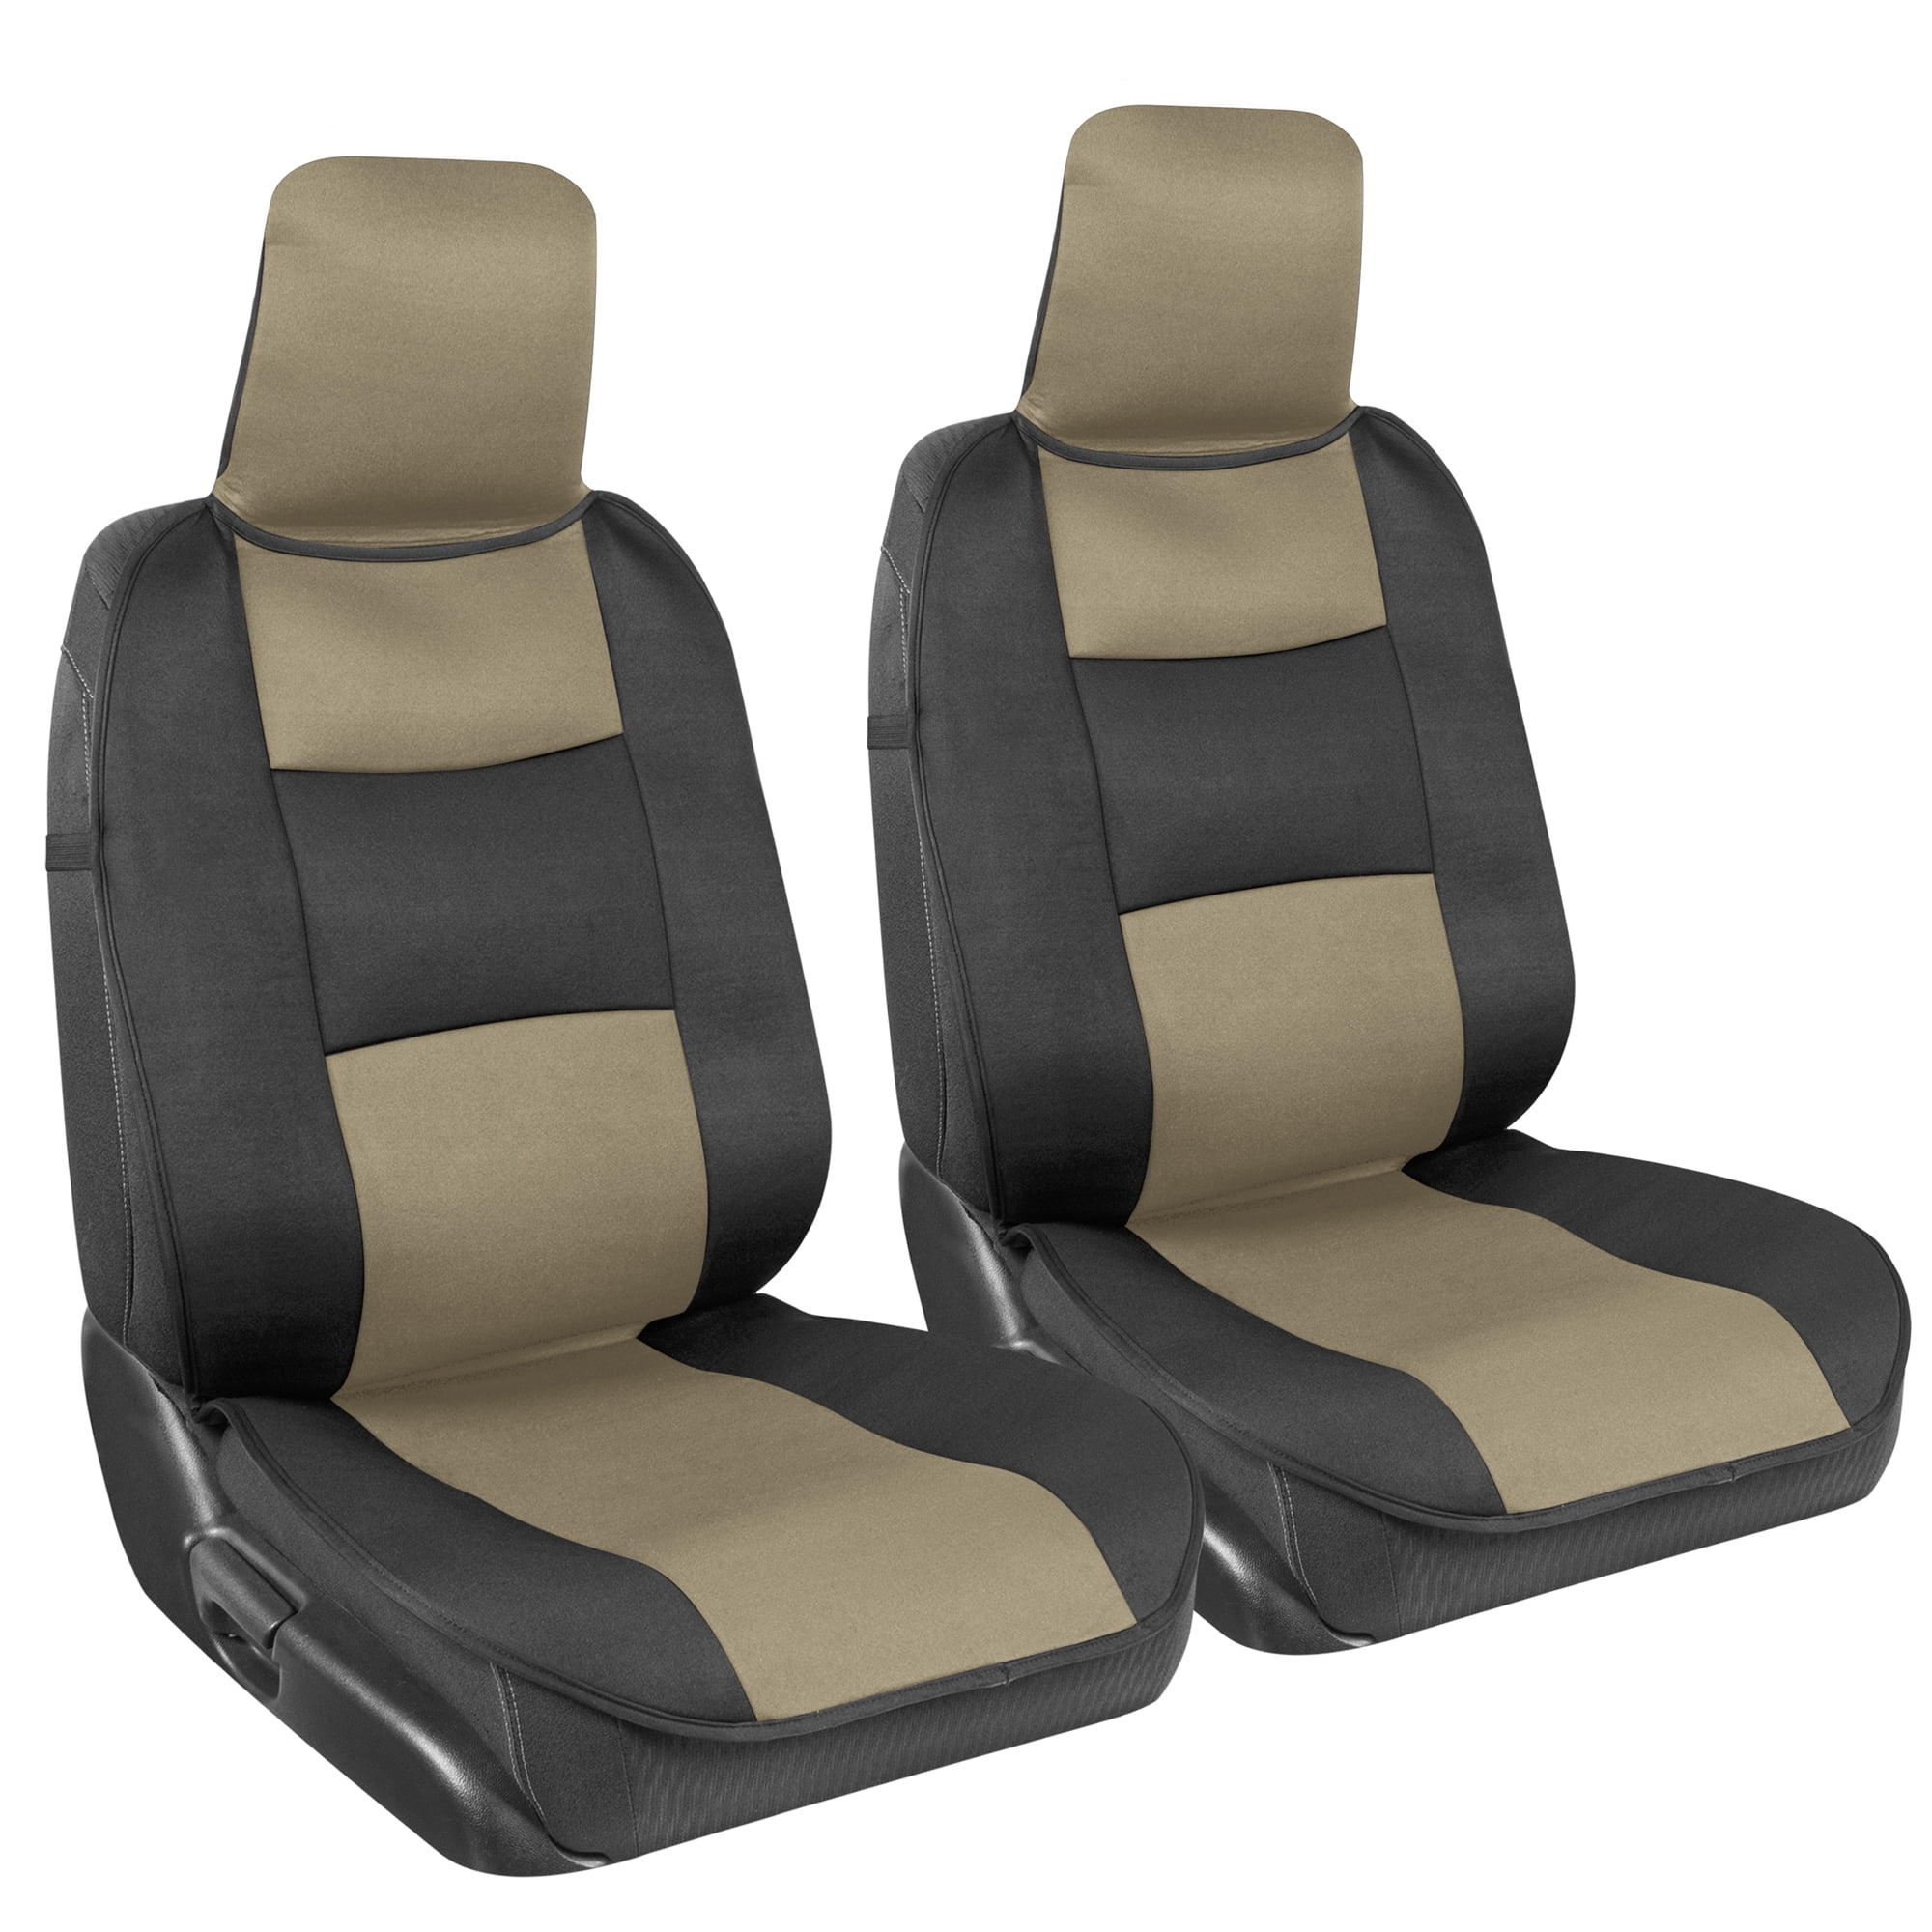 Set of 2x White Head Rest Cover Mercedes Car Van Pick-up Two Headrest cover pad 